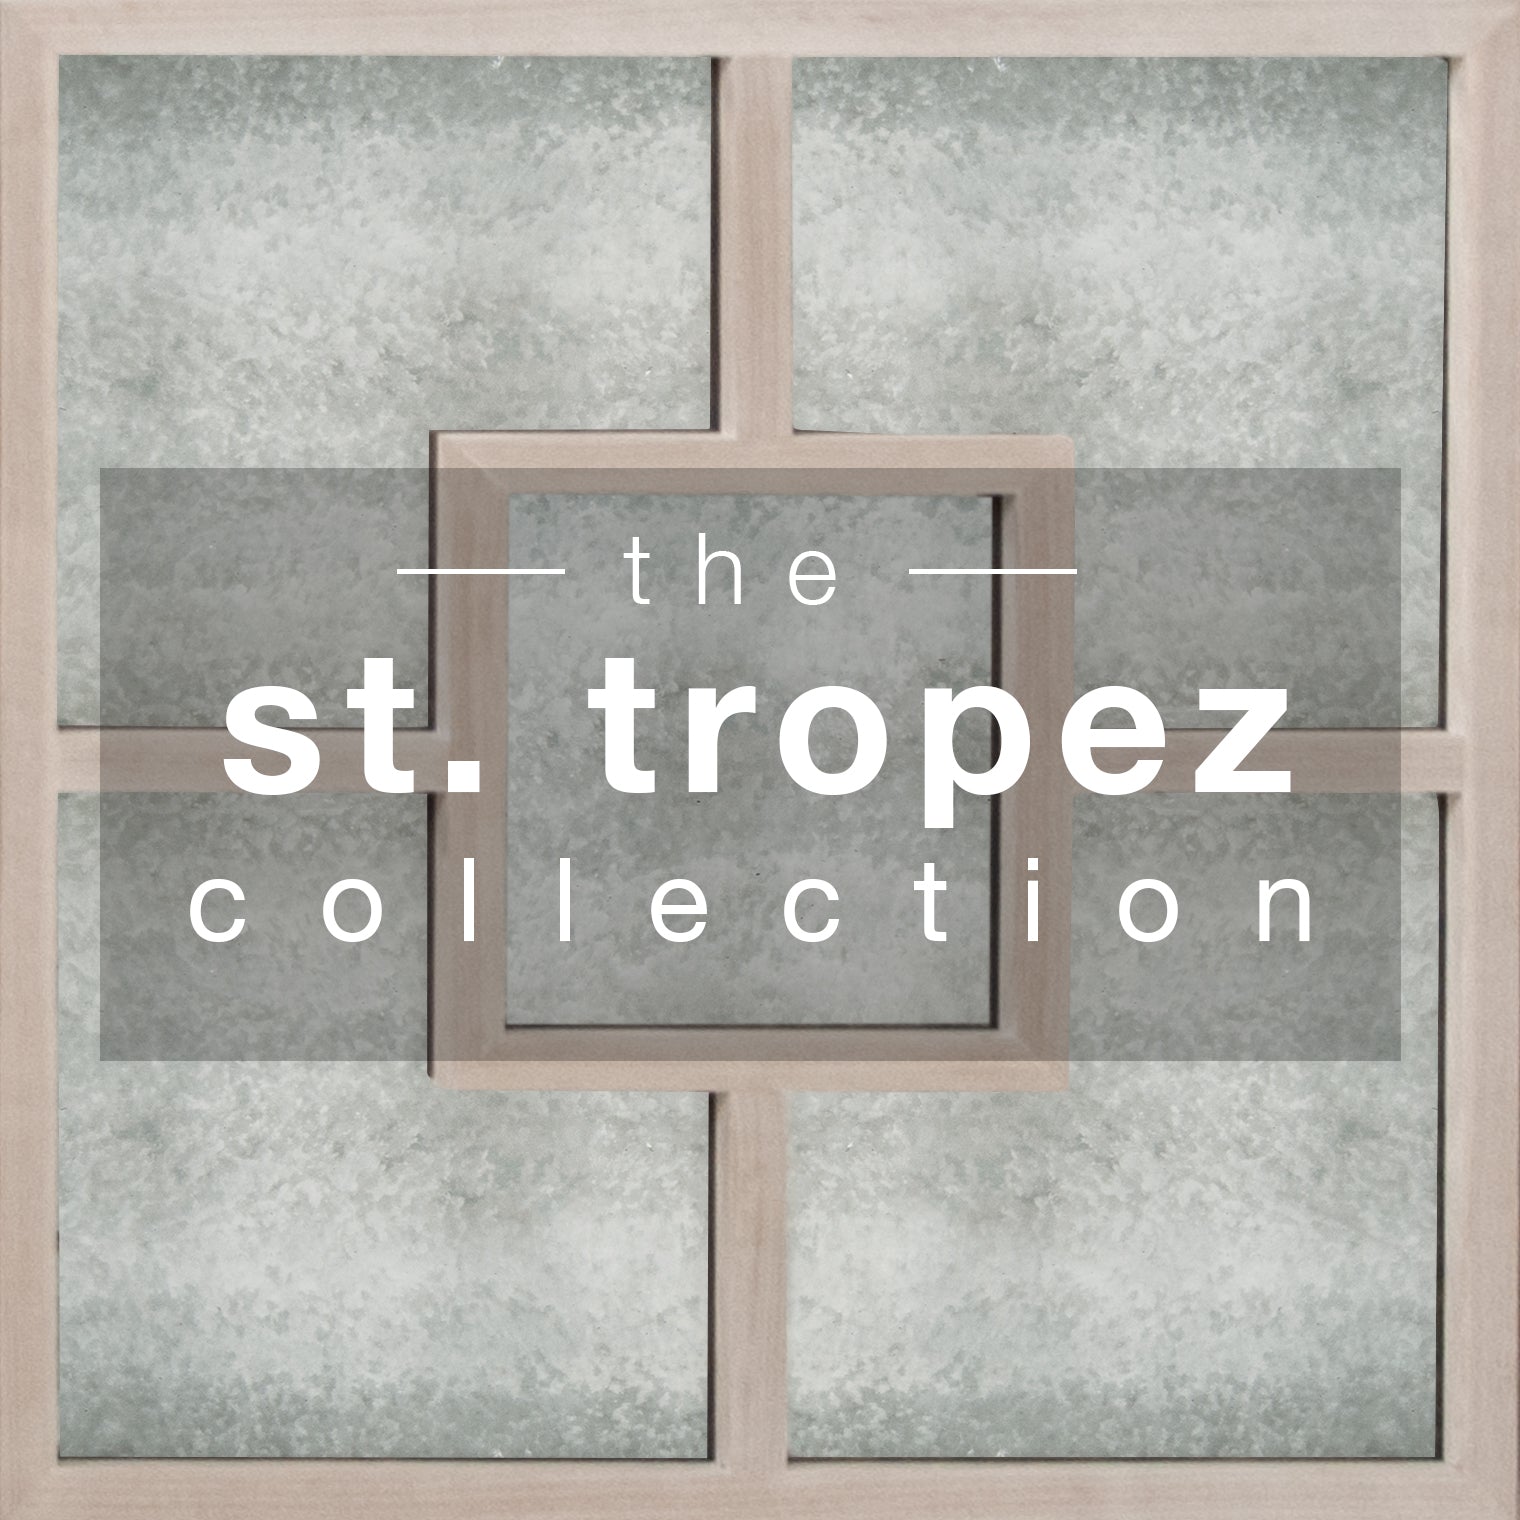 Mottled gray and wood in design of squares with 'the St. Tropez Collection' in white letters inside a center shaded rectangle